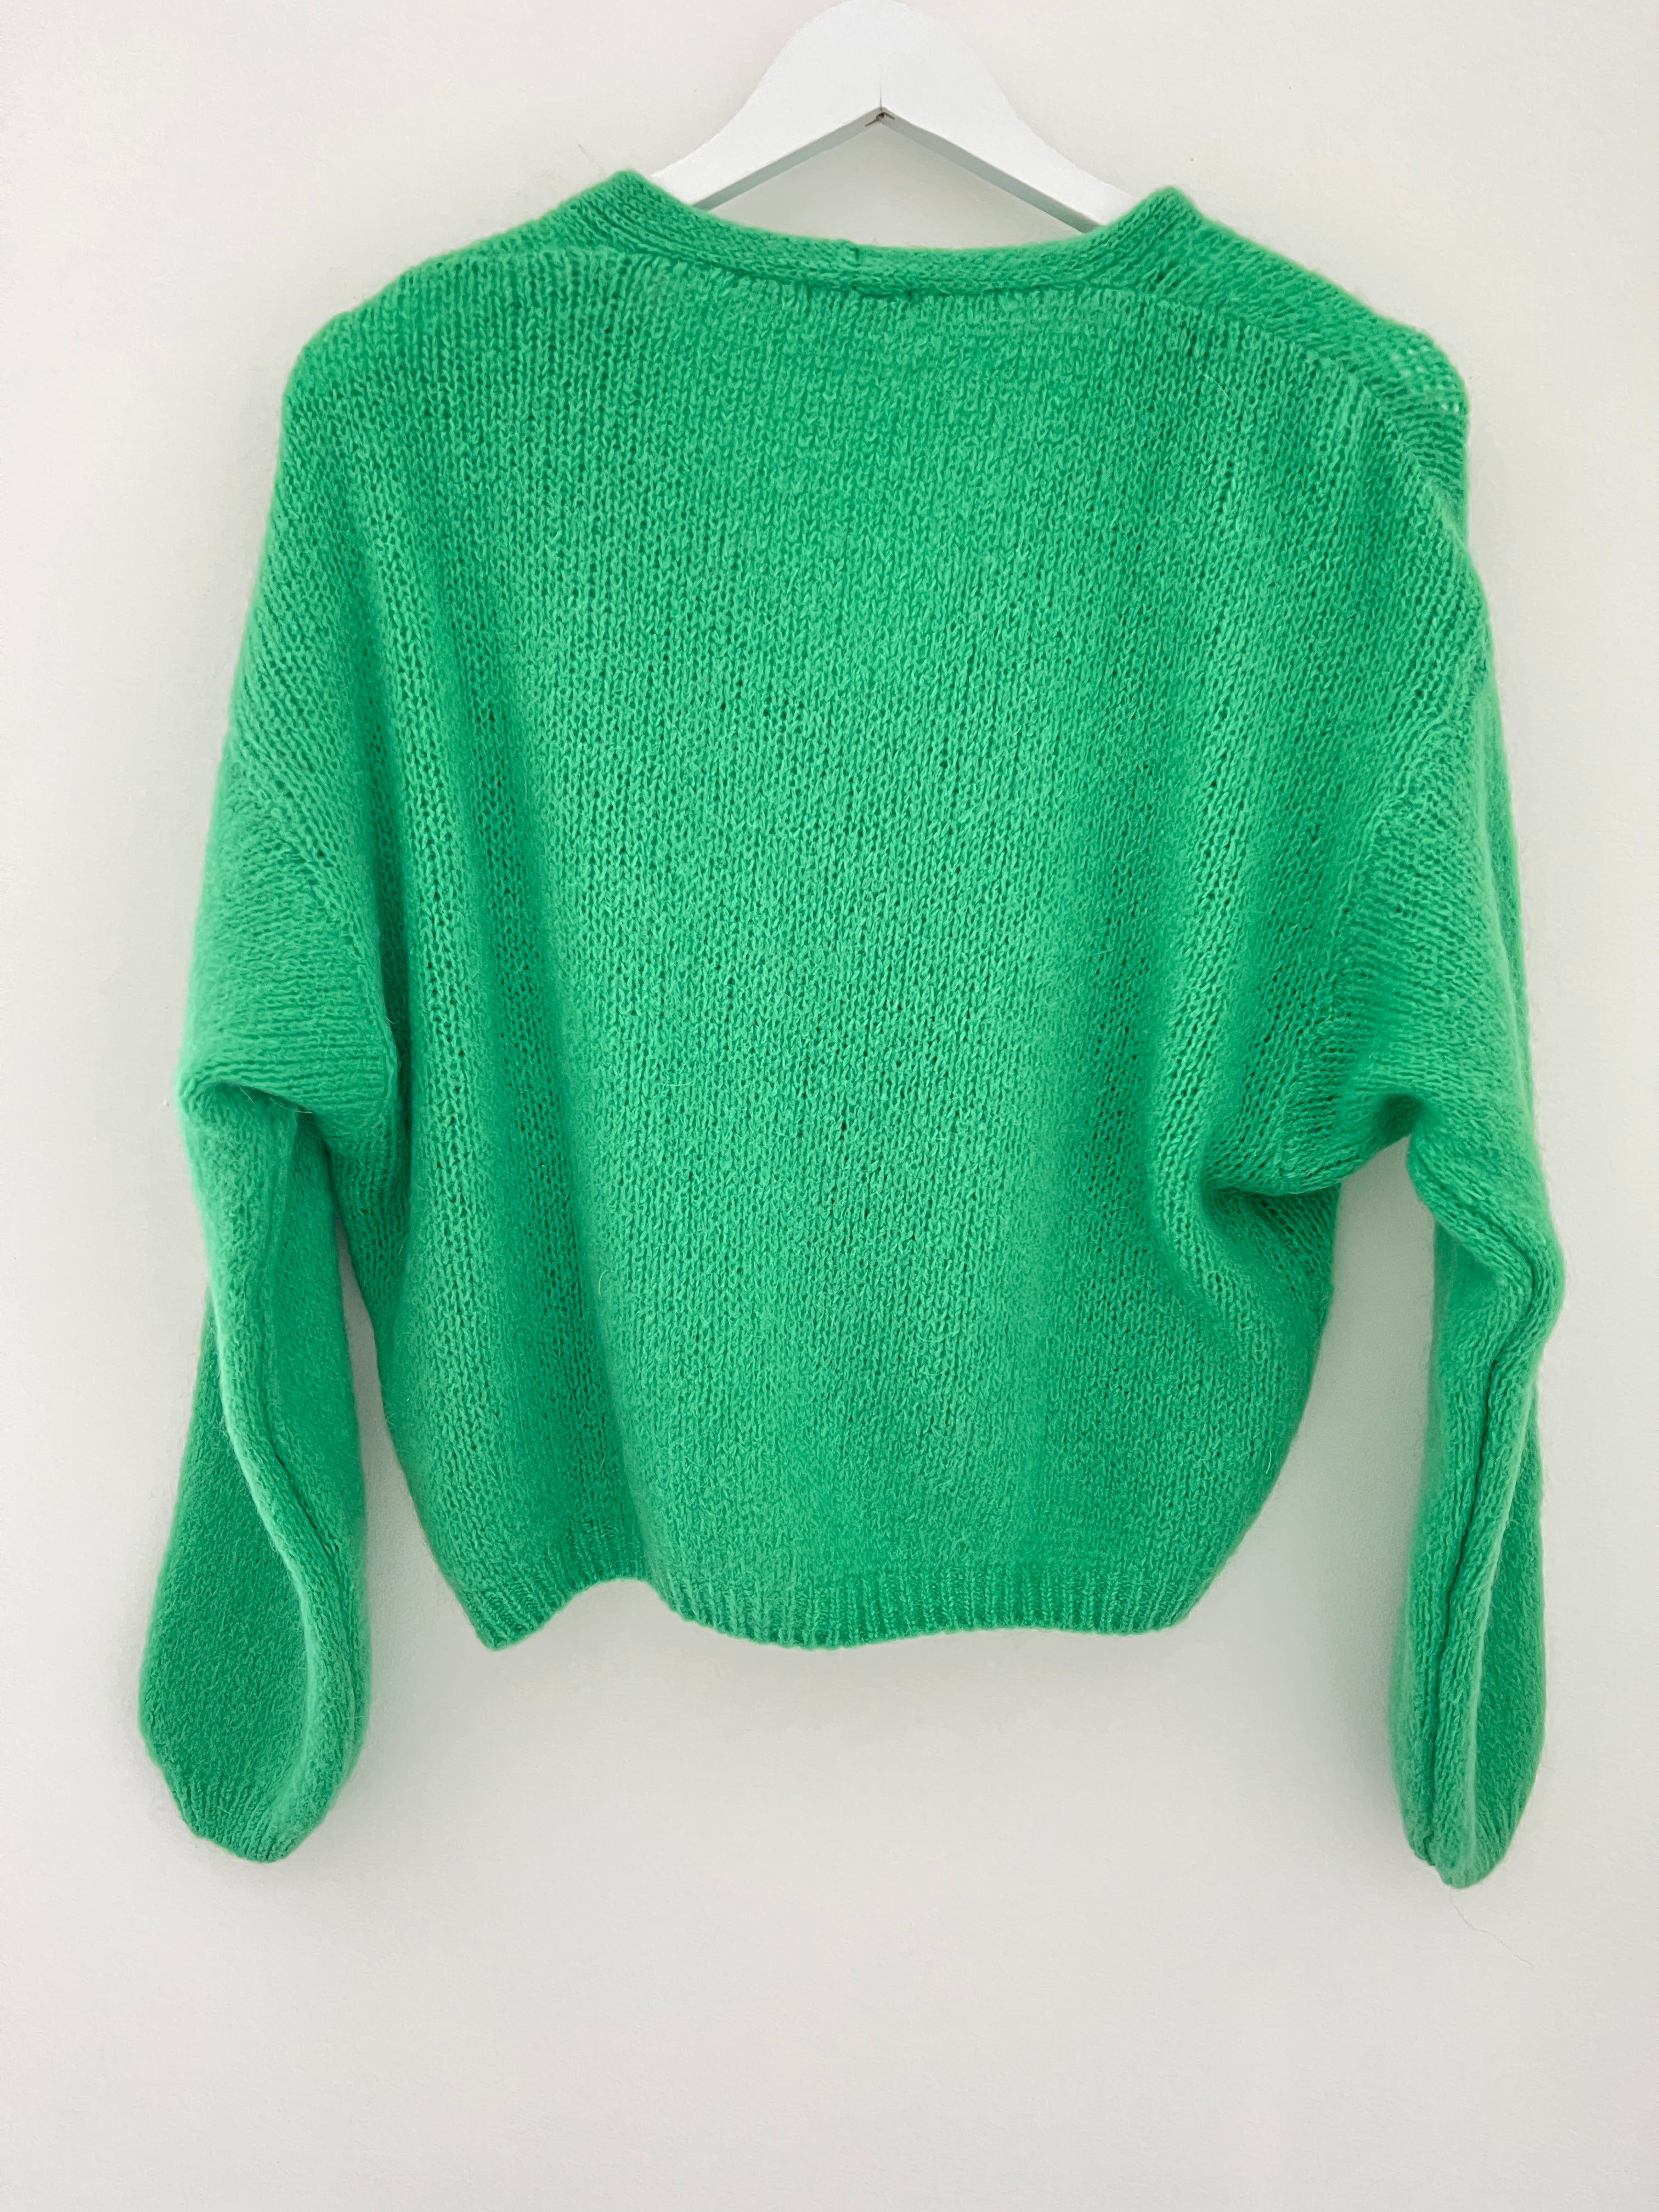 Mohair Cropped Cardi in Emerald